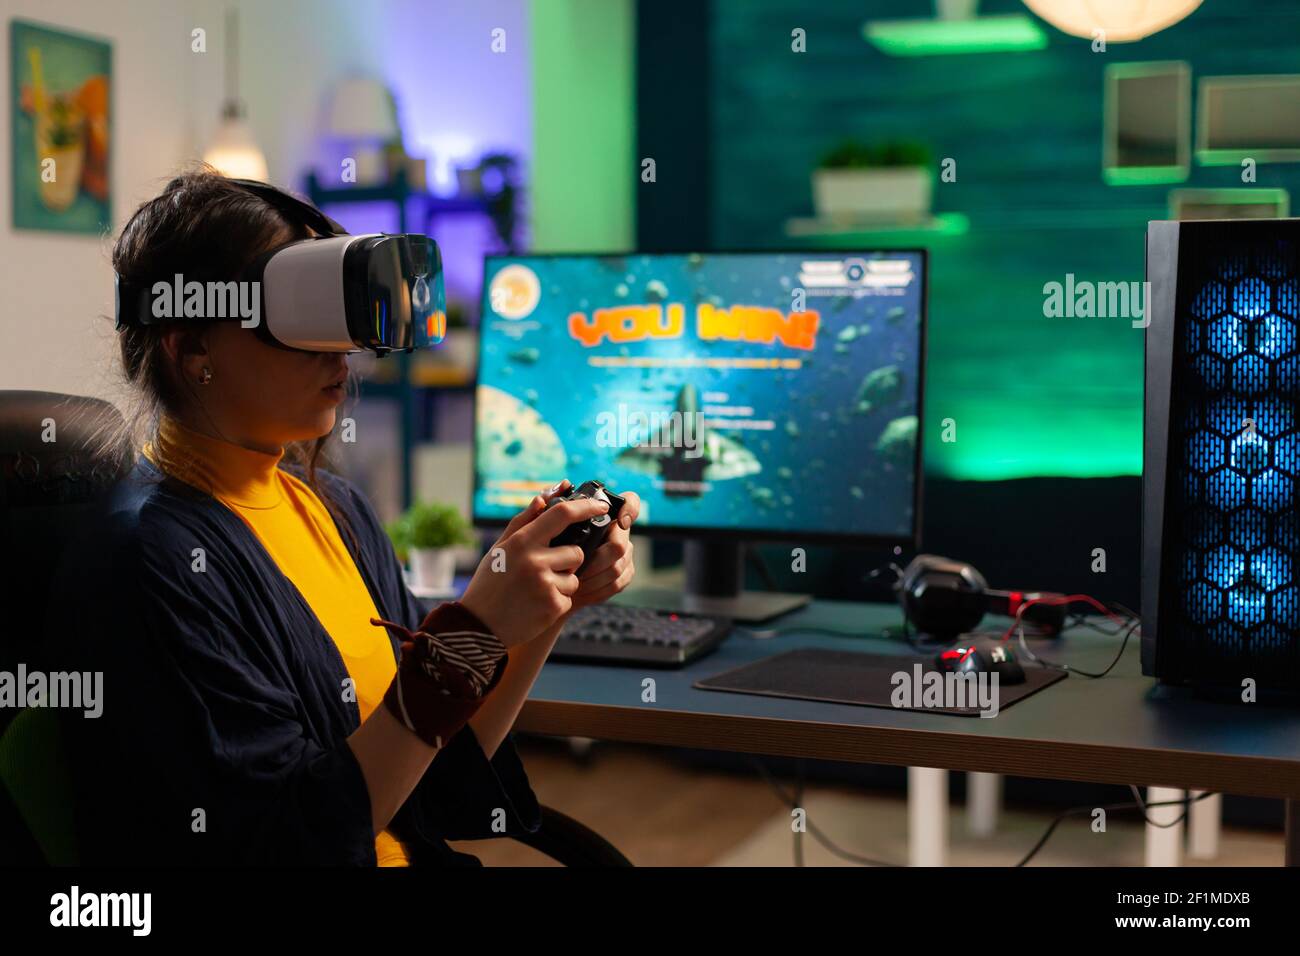 Competitive gamer looking into powerful computer playing online shooter game late at night with vr headset and console wireless